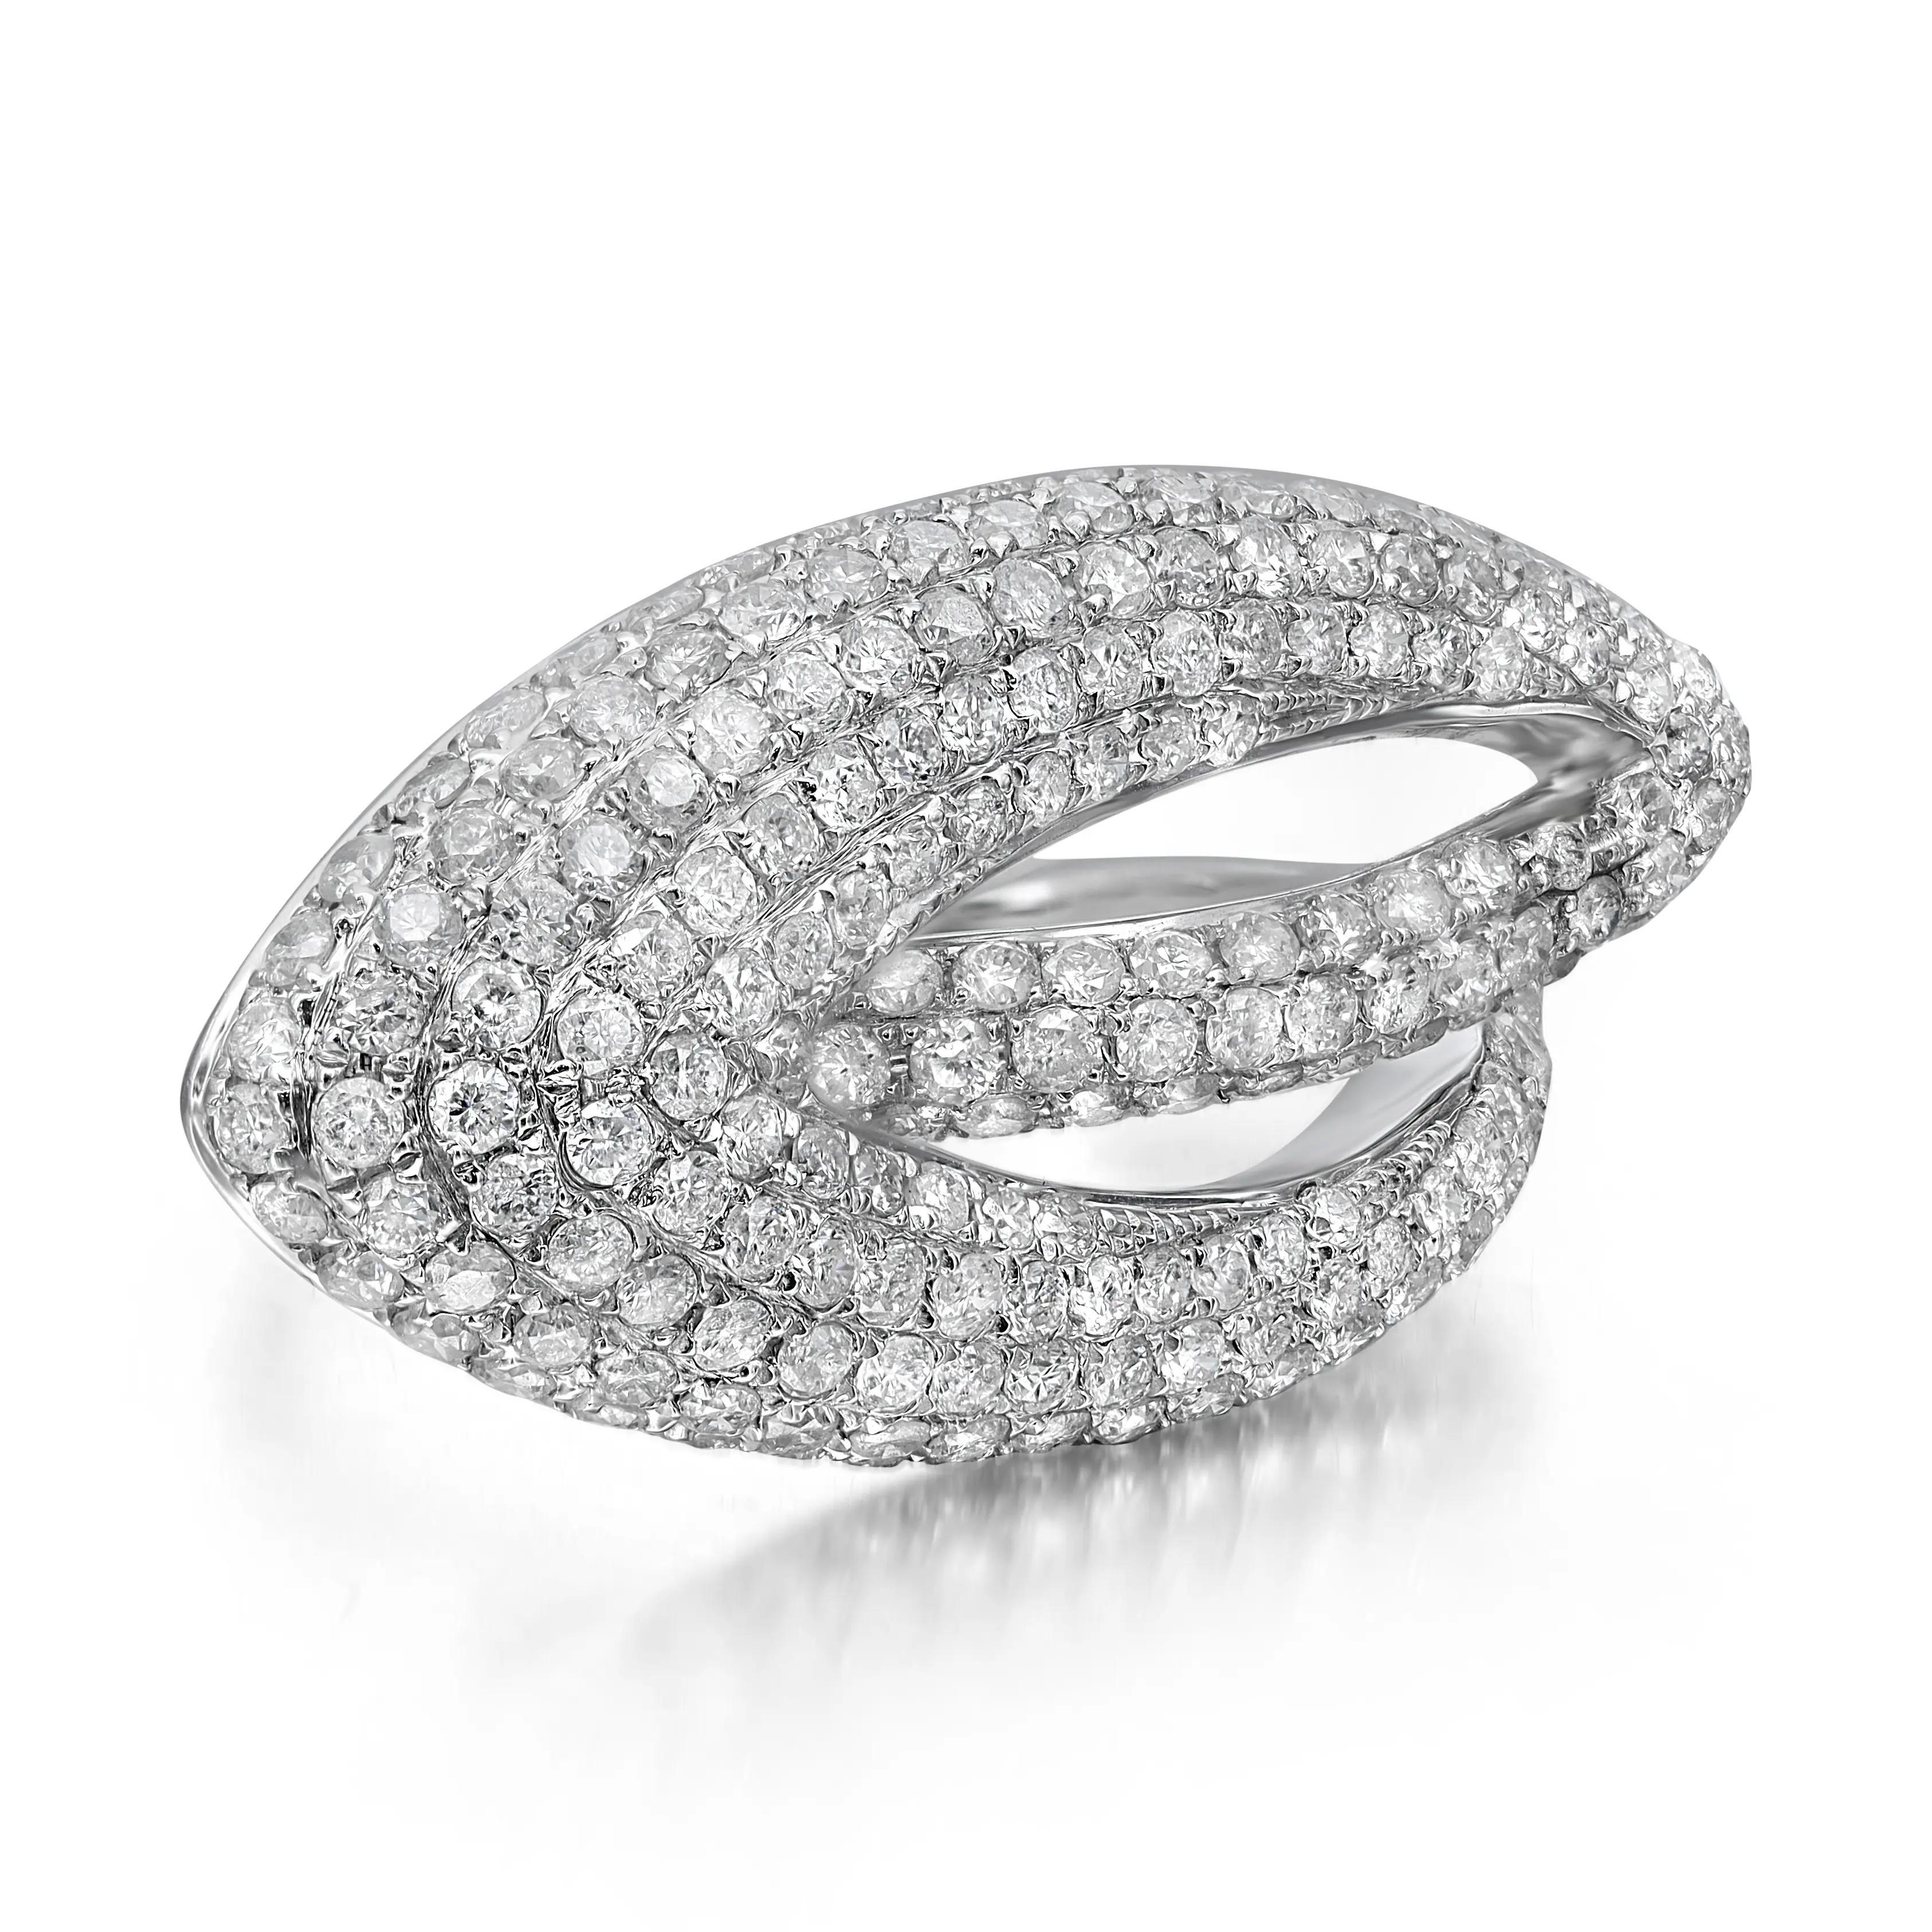 Stylish and elegant diamond cocktail ring rendered in highly polished 14K white gold. This ring features sparkling round cut diamonds in pave setting totaling 2.26 carats. Diamond quality: H - I color and SI1 clarity. Ring size: 7.5. Total weight: 6